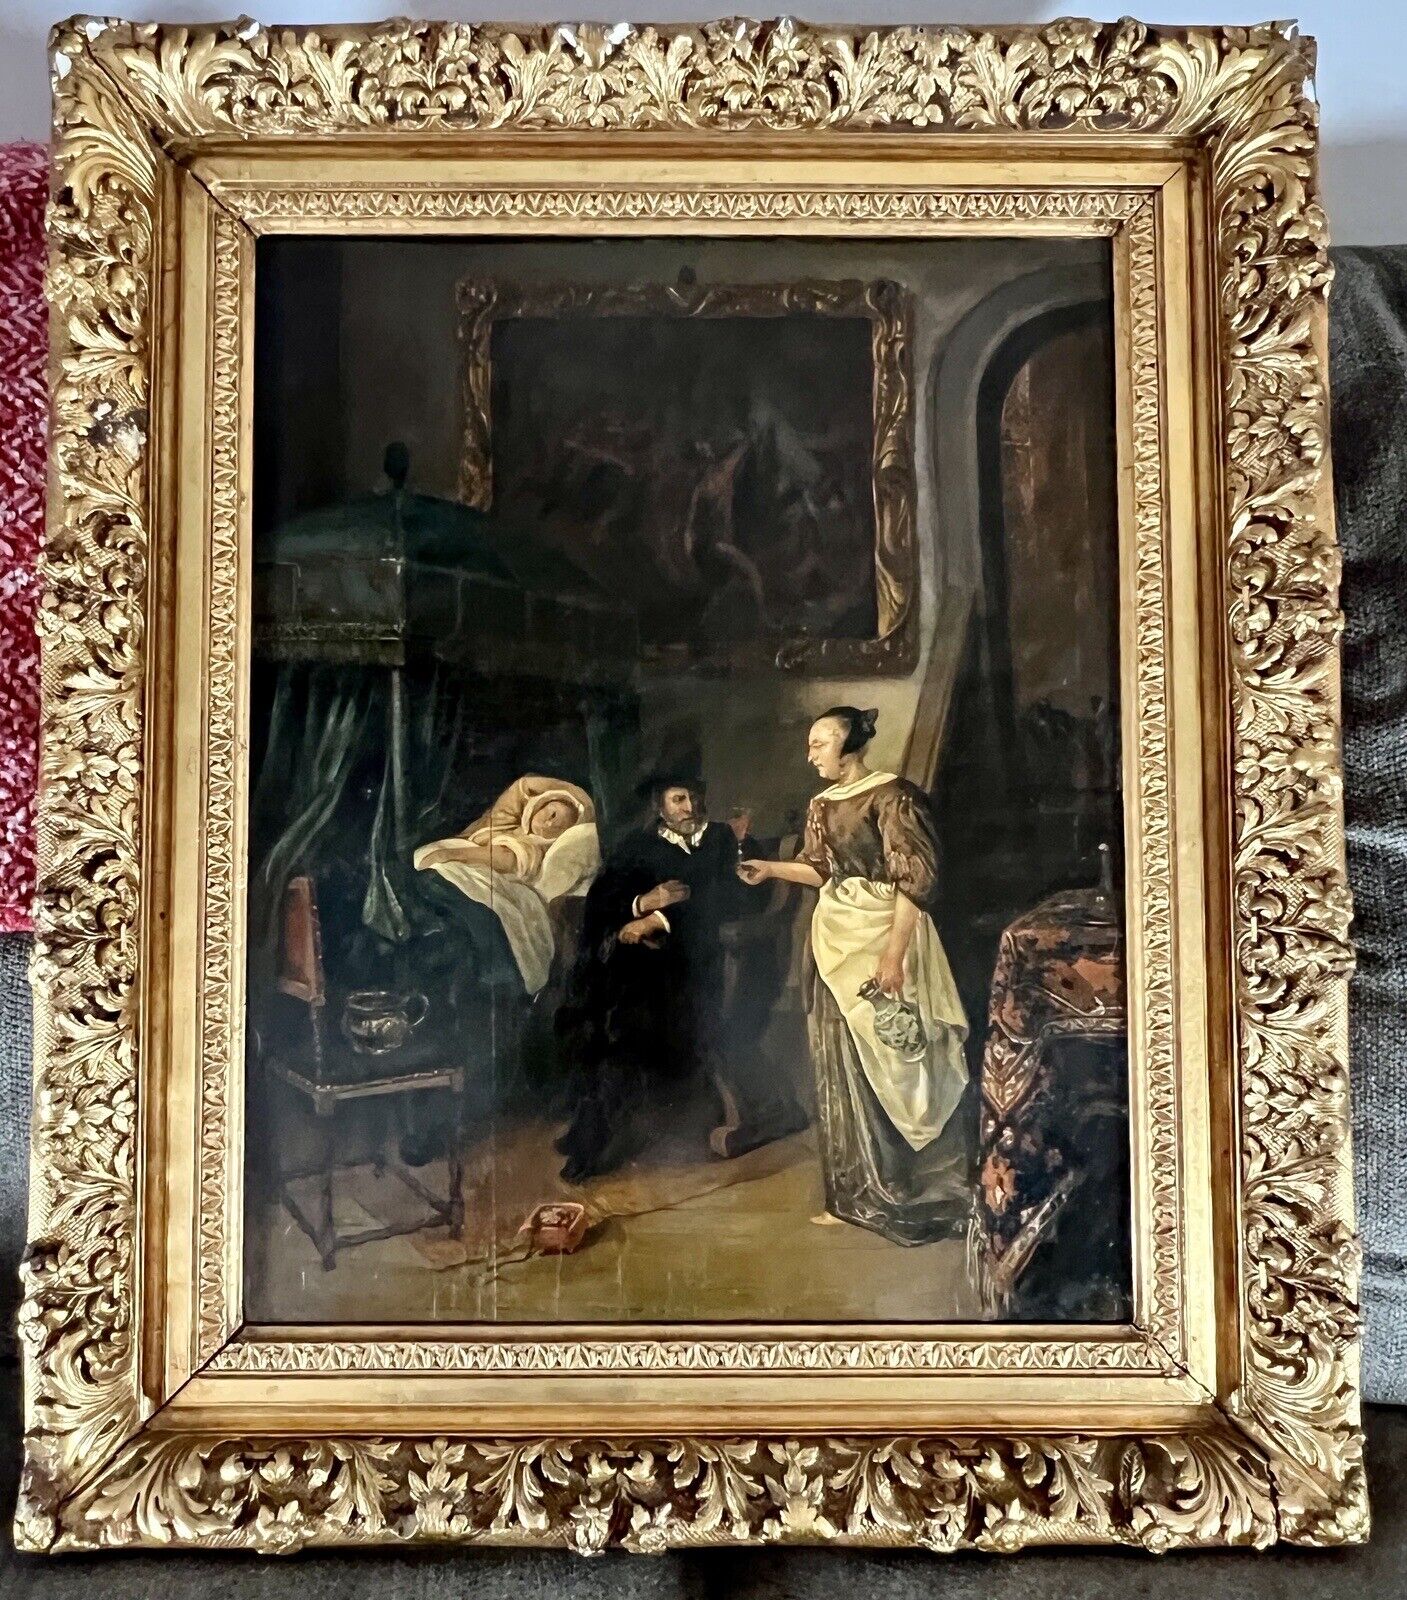 Antique 19th Century Dutch Oil Painting, Baroque Revival Style After Jan Steen